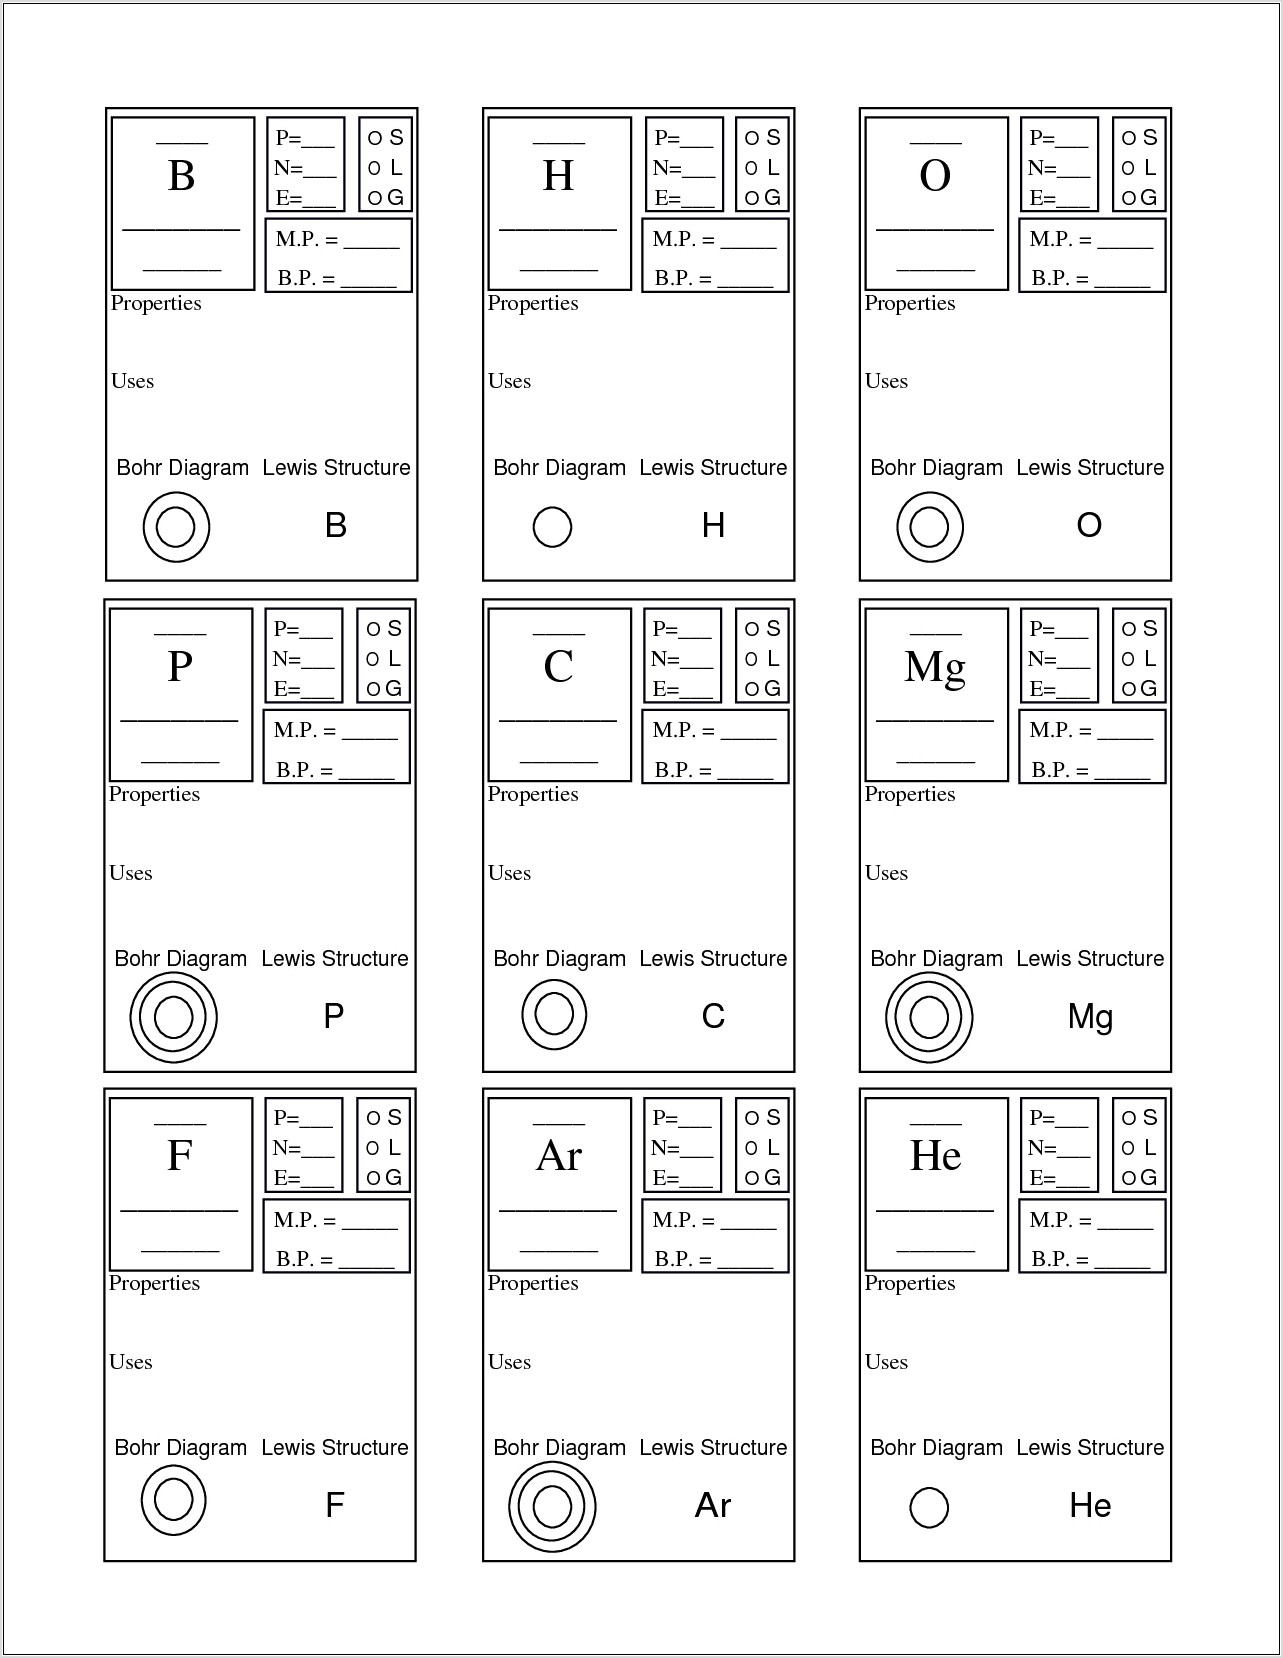 Periodic Table Puzzle Worksheet Answer Key